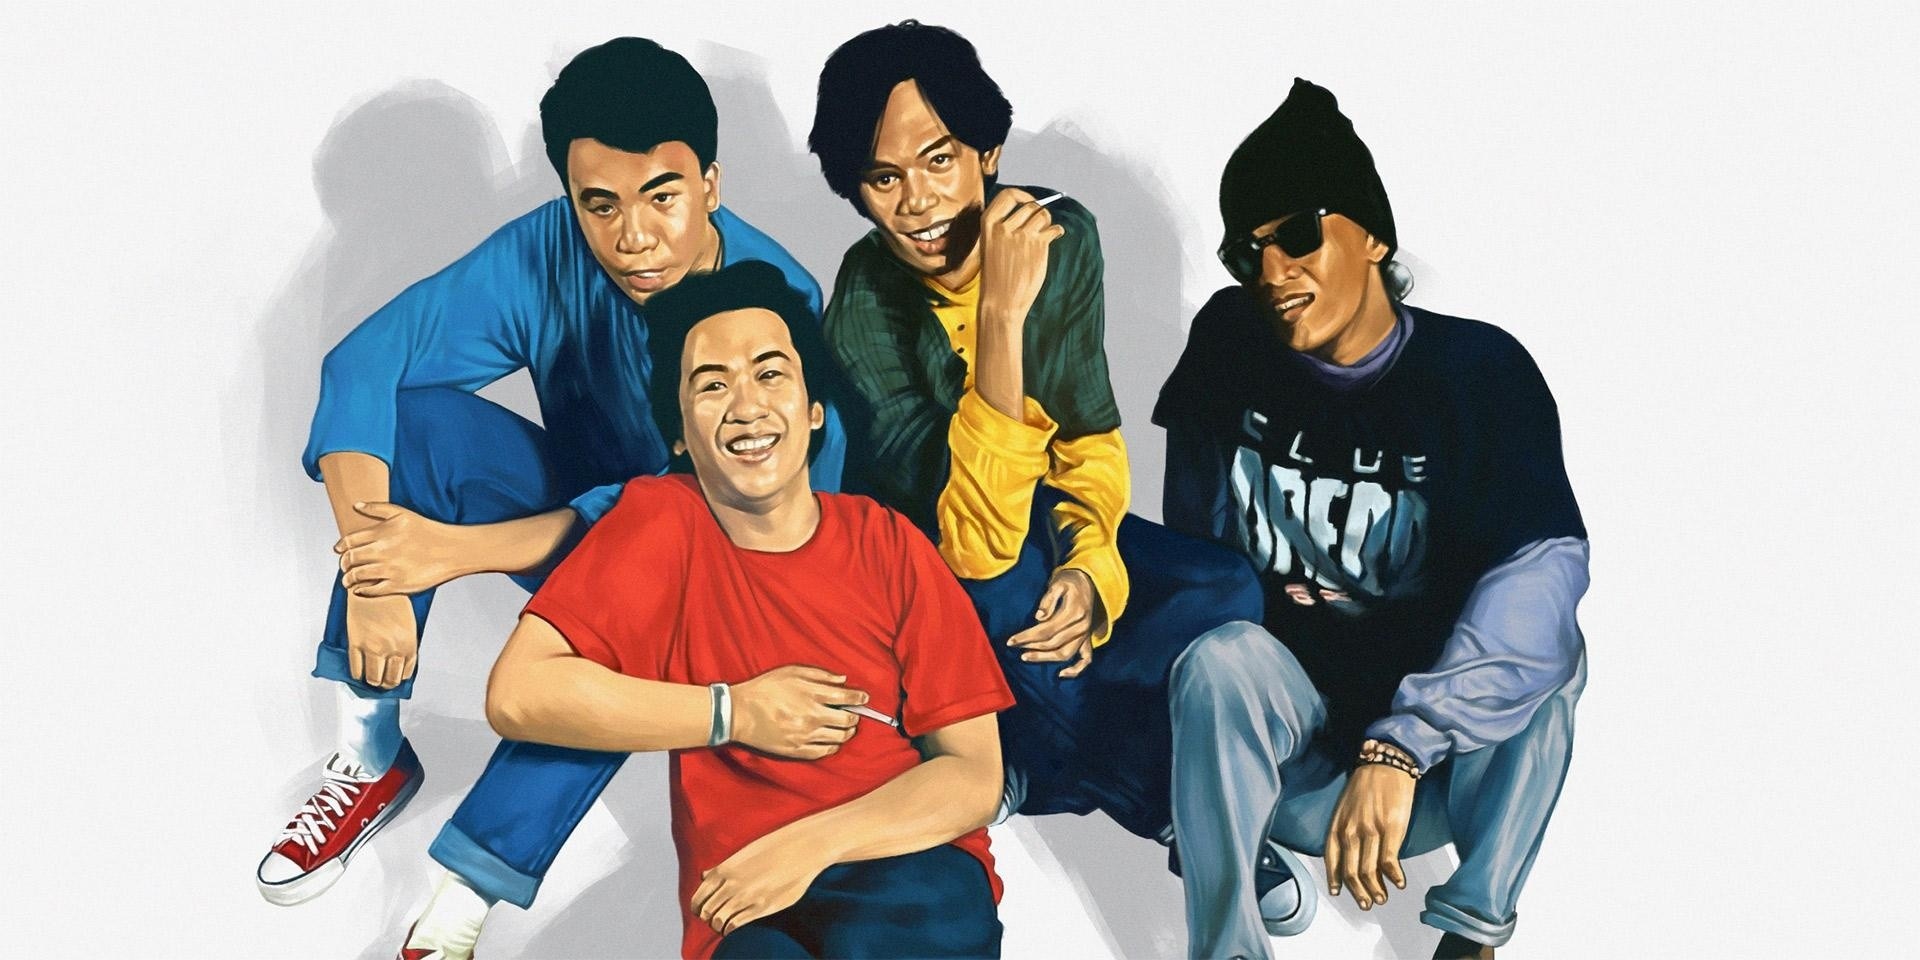 Offshore Music to release exclusive Eraserheads merch tonight